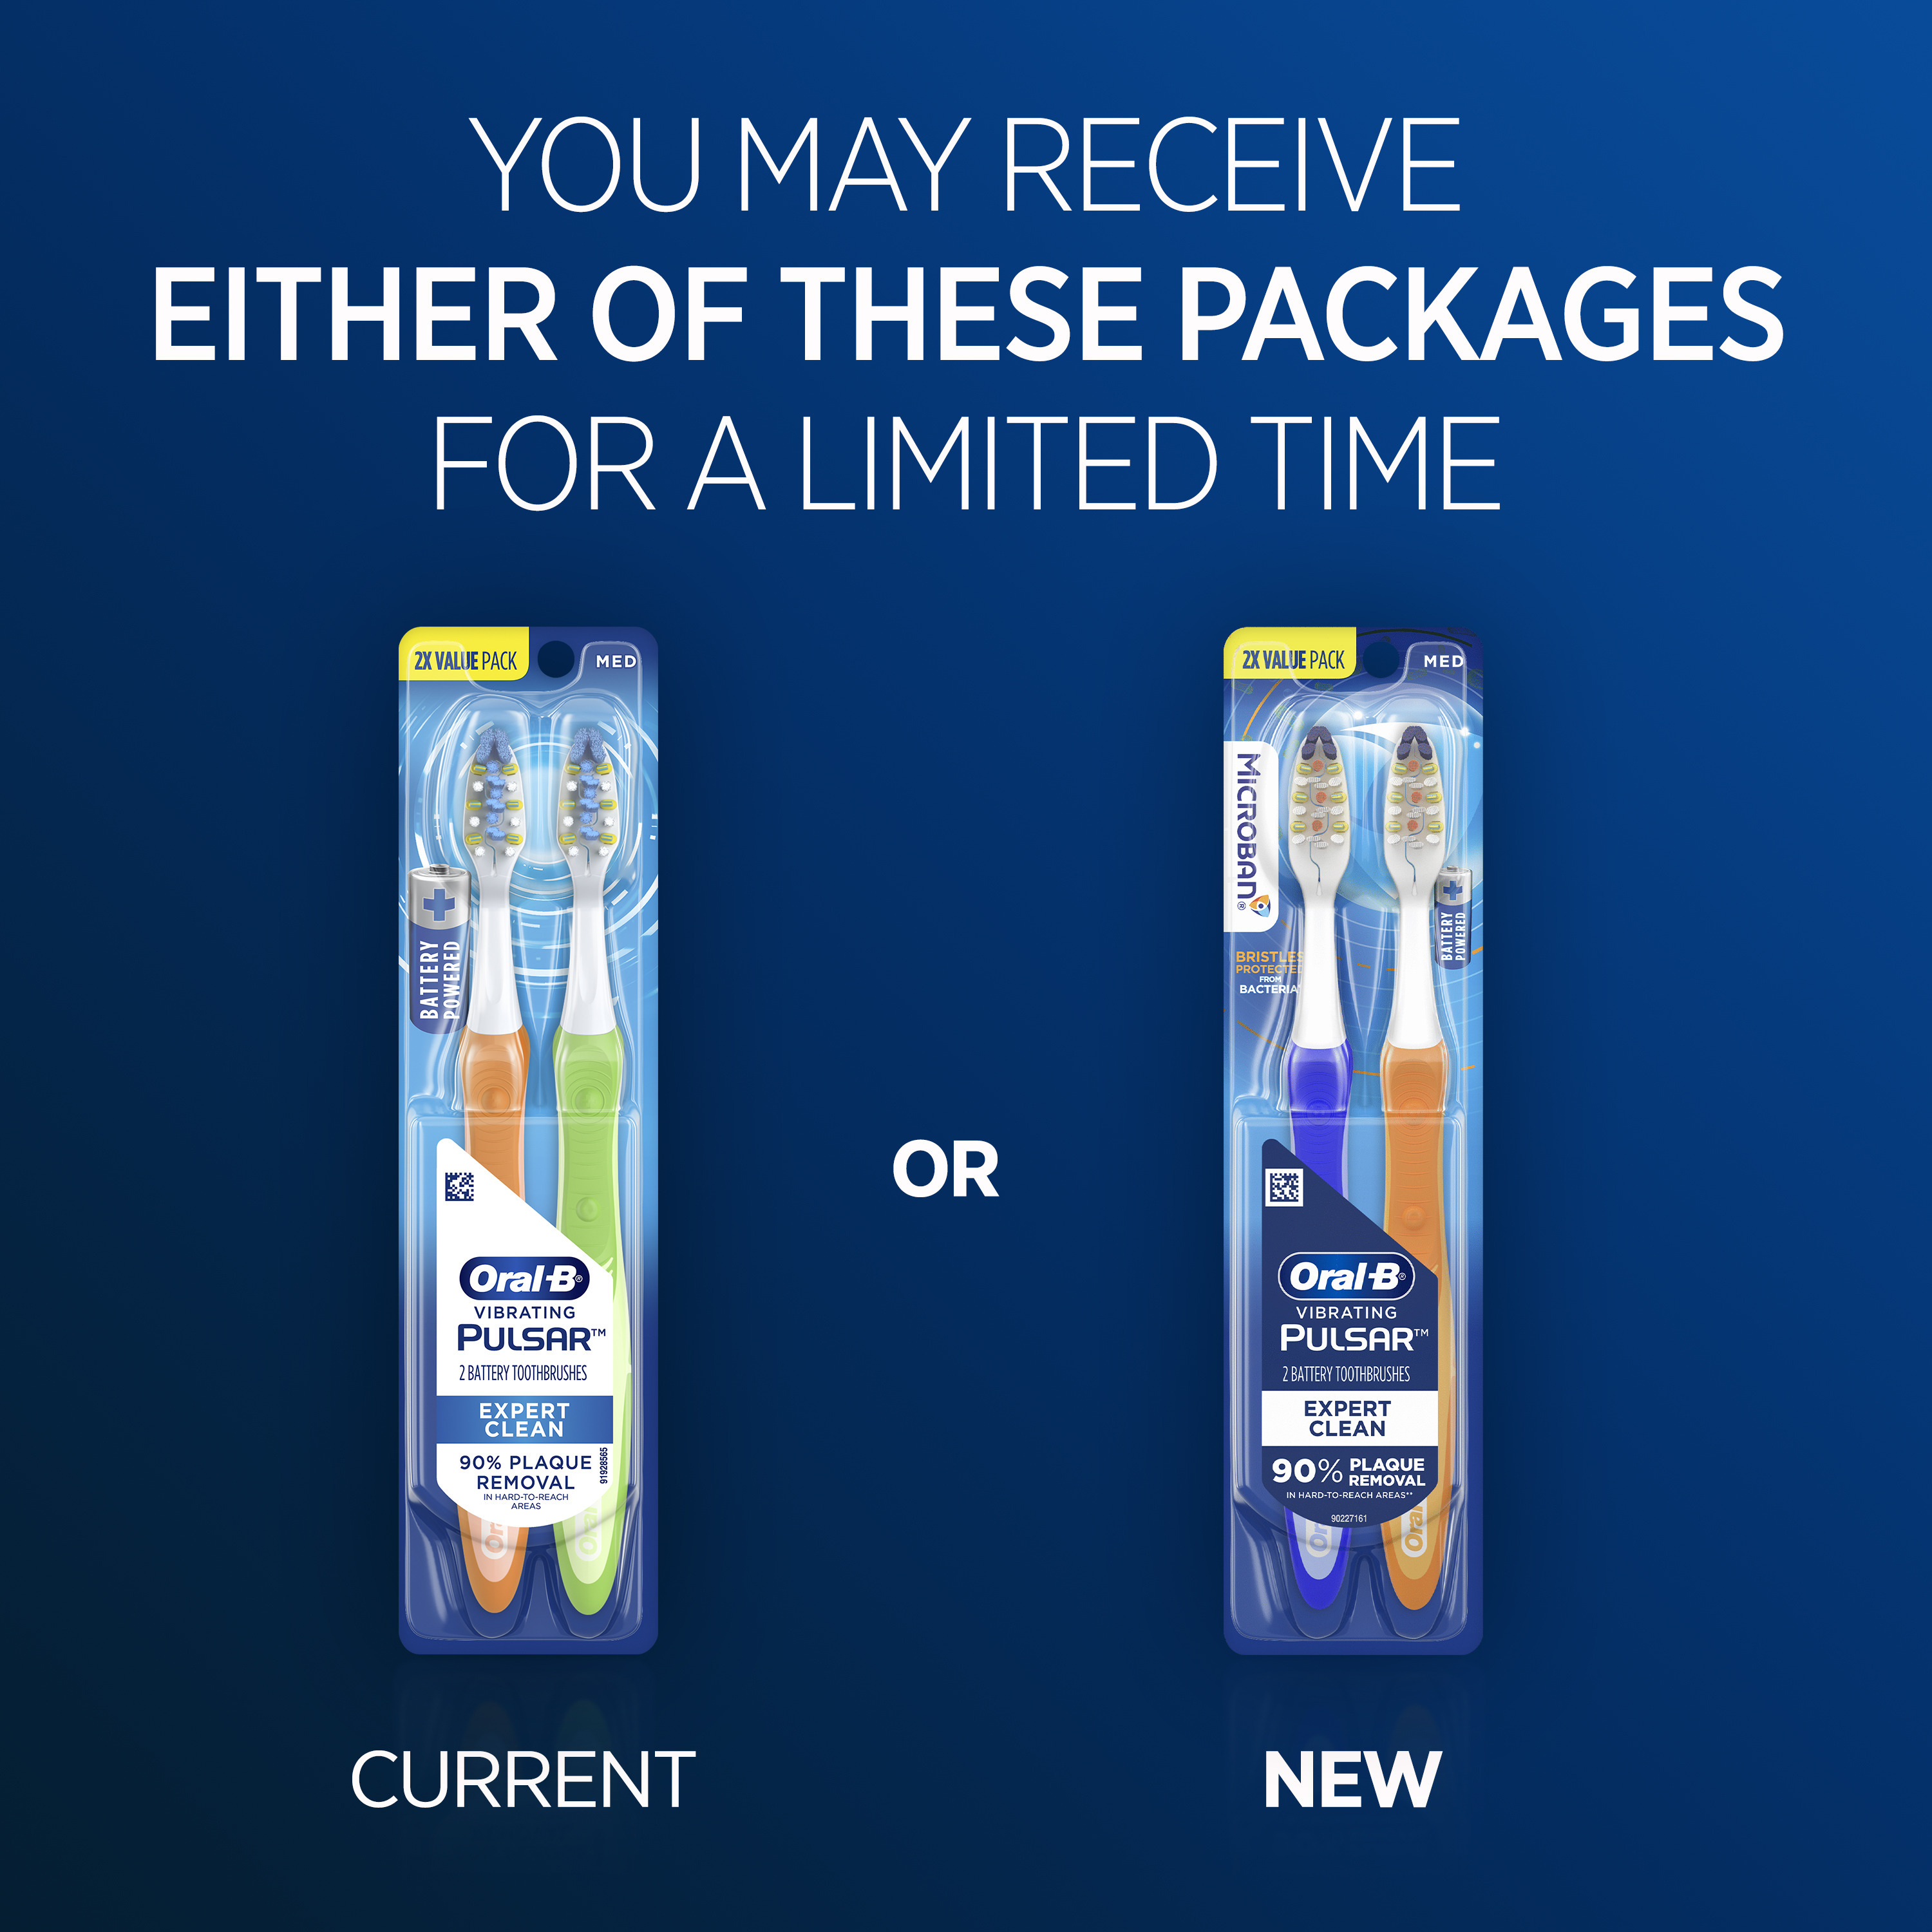 Oral-B Vibrating Pulsar Battery Toothbrushes, Full Head, Medium, 2 Count, for Adults and Children 3+ - image 5 of 10